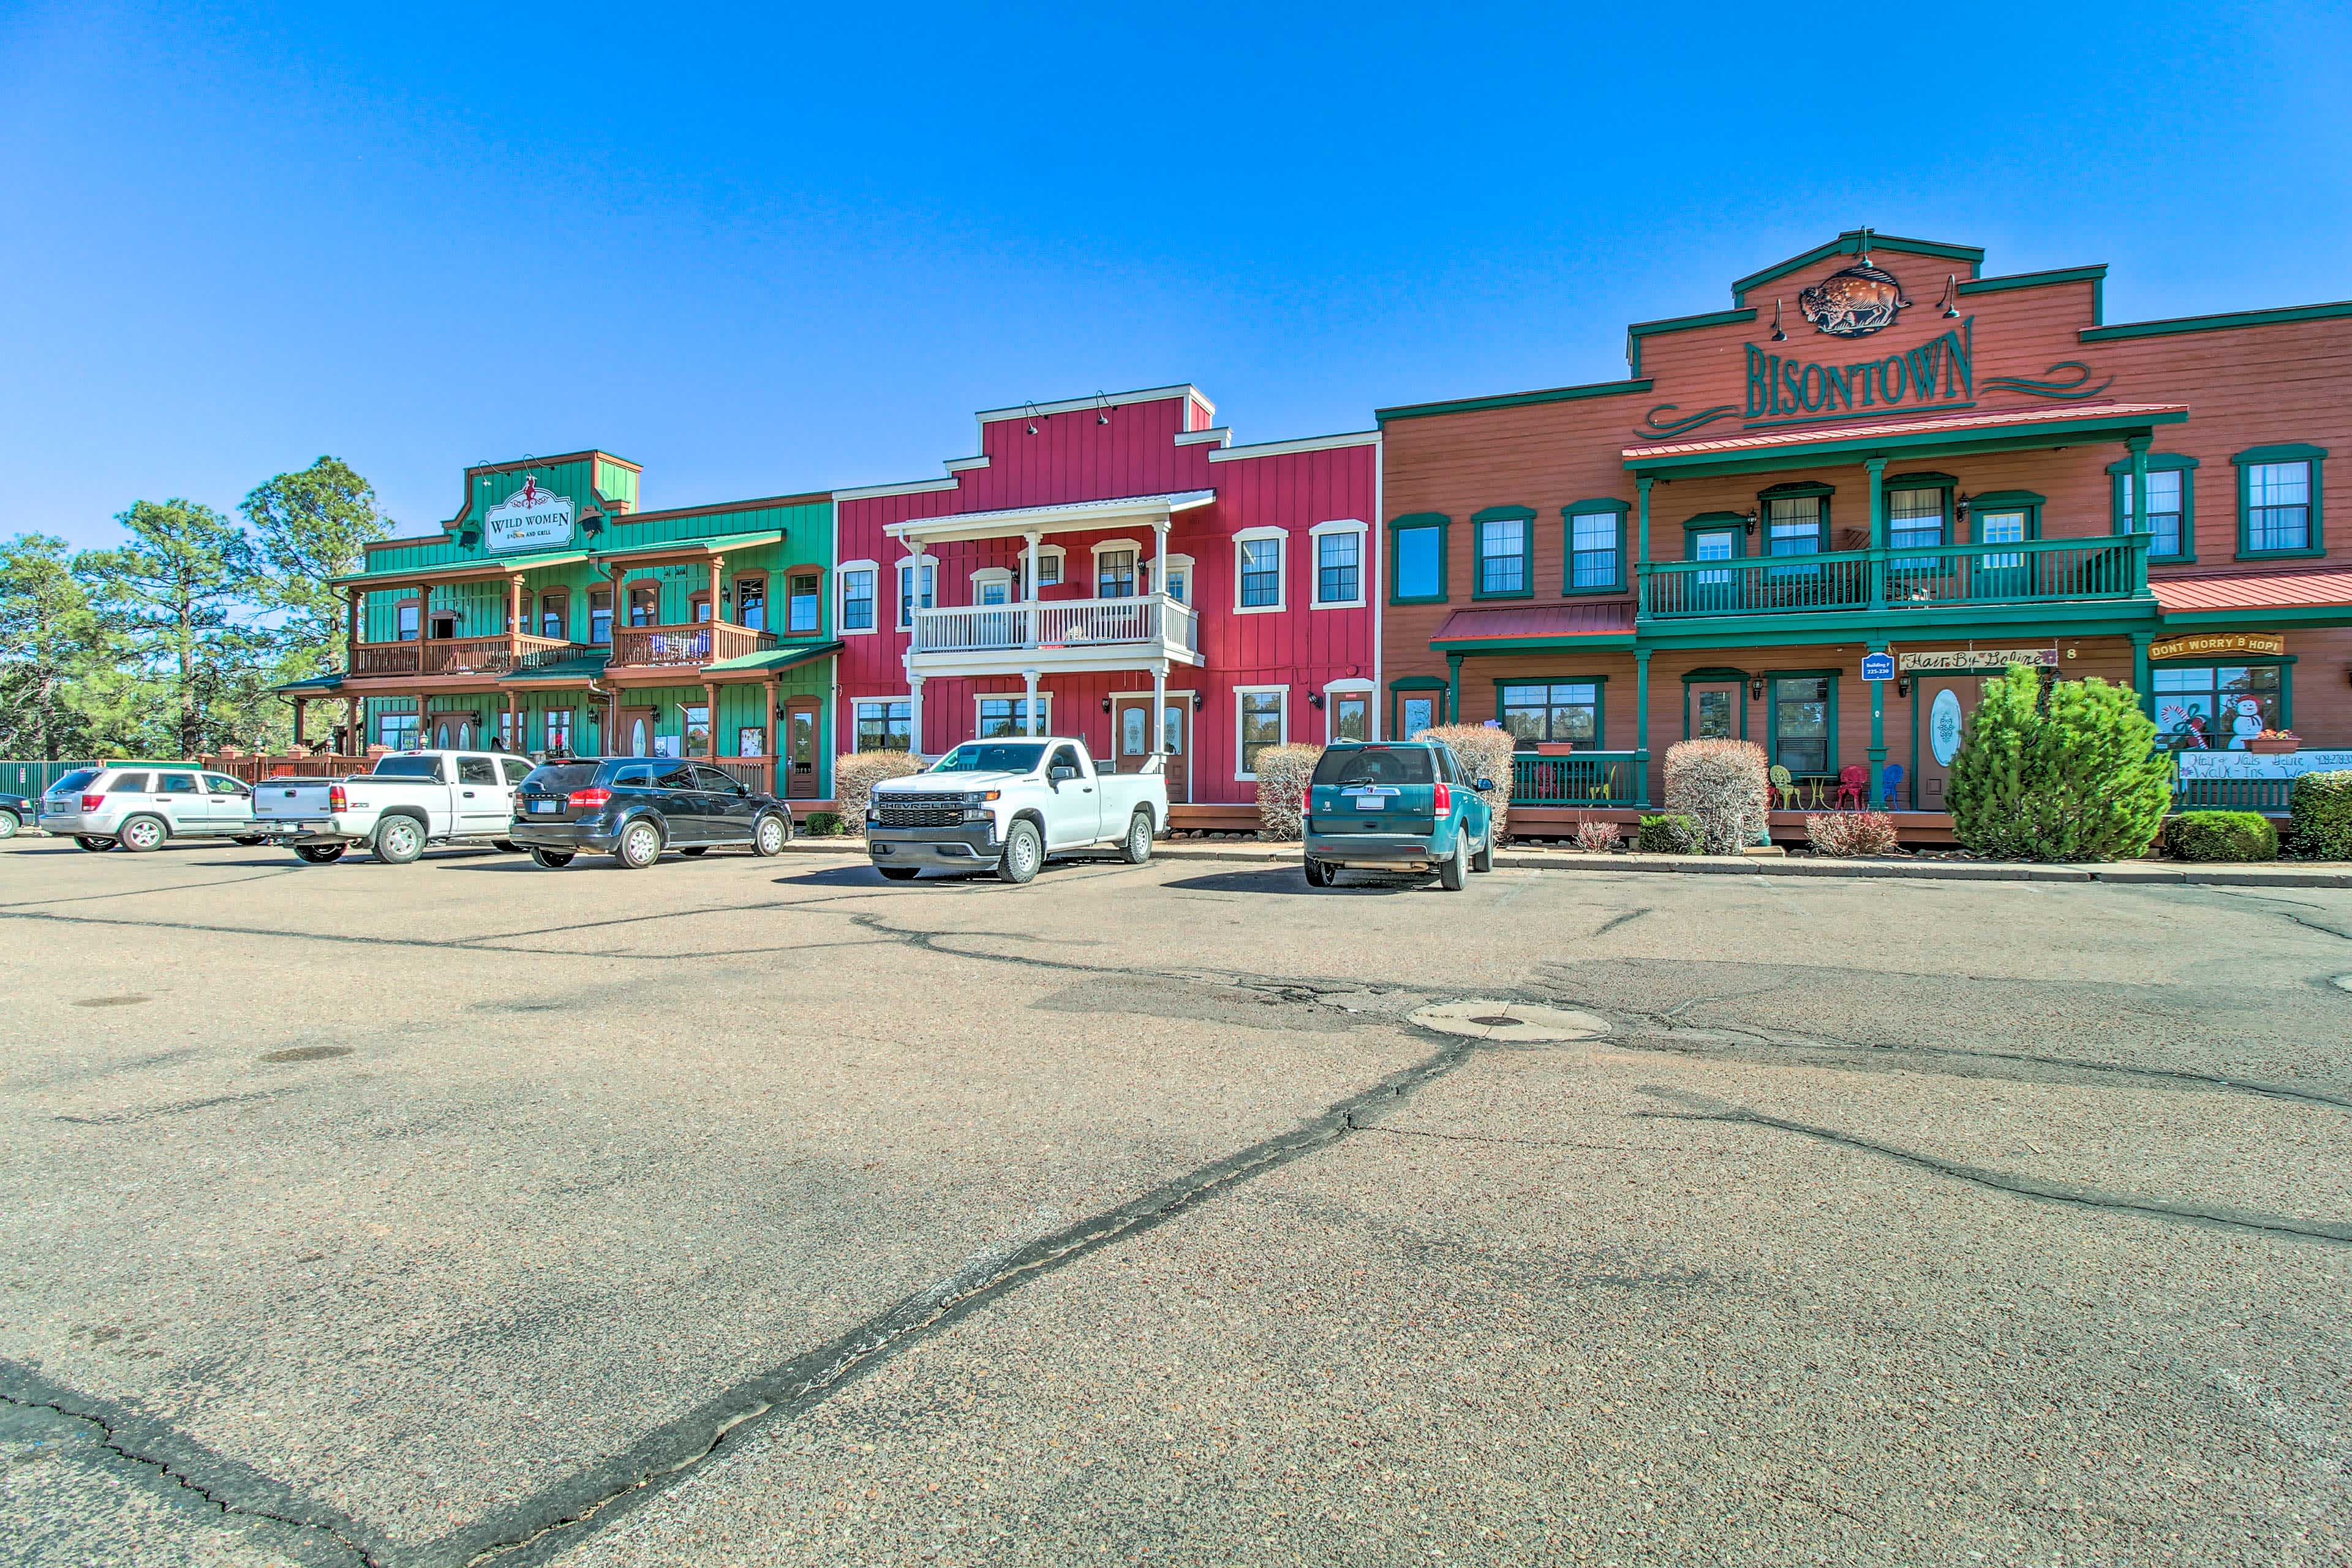 View of a strip of old fashioned buildings with cars parked in the front and blue skies overhead in Overgaard, AZ